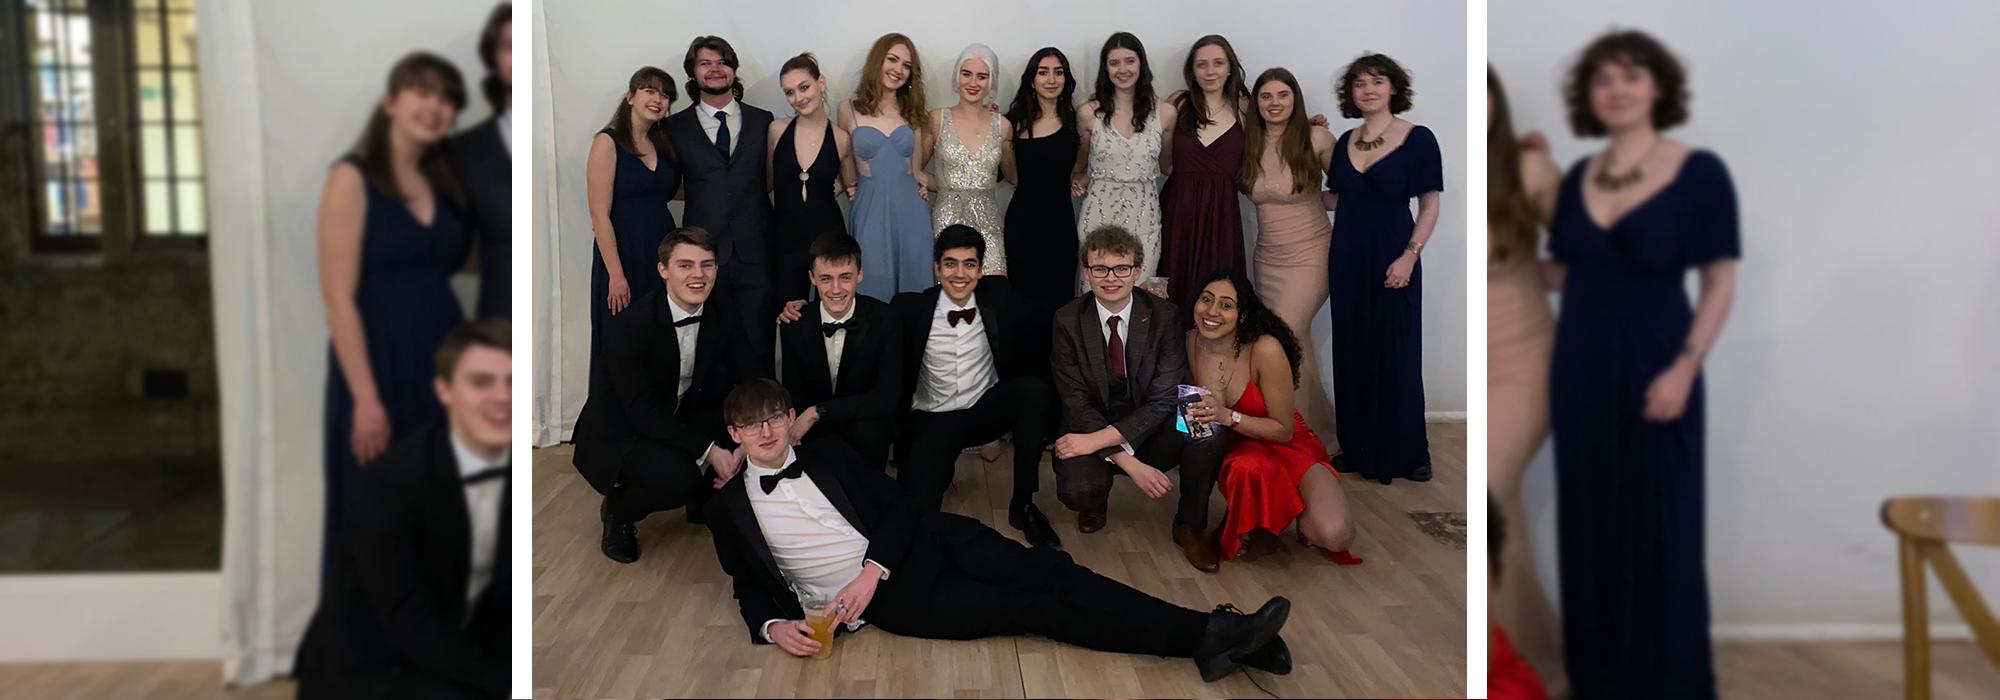 Second-year historians gathered together after attending a Formal Hall